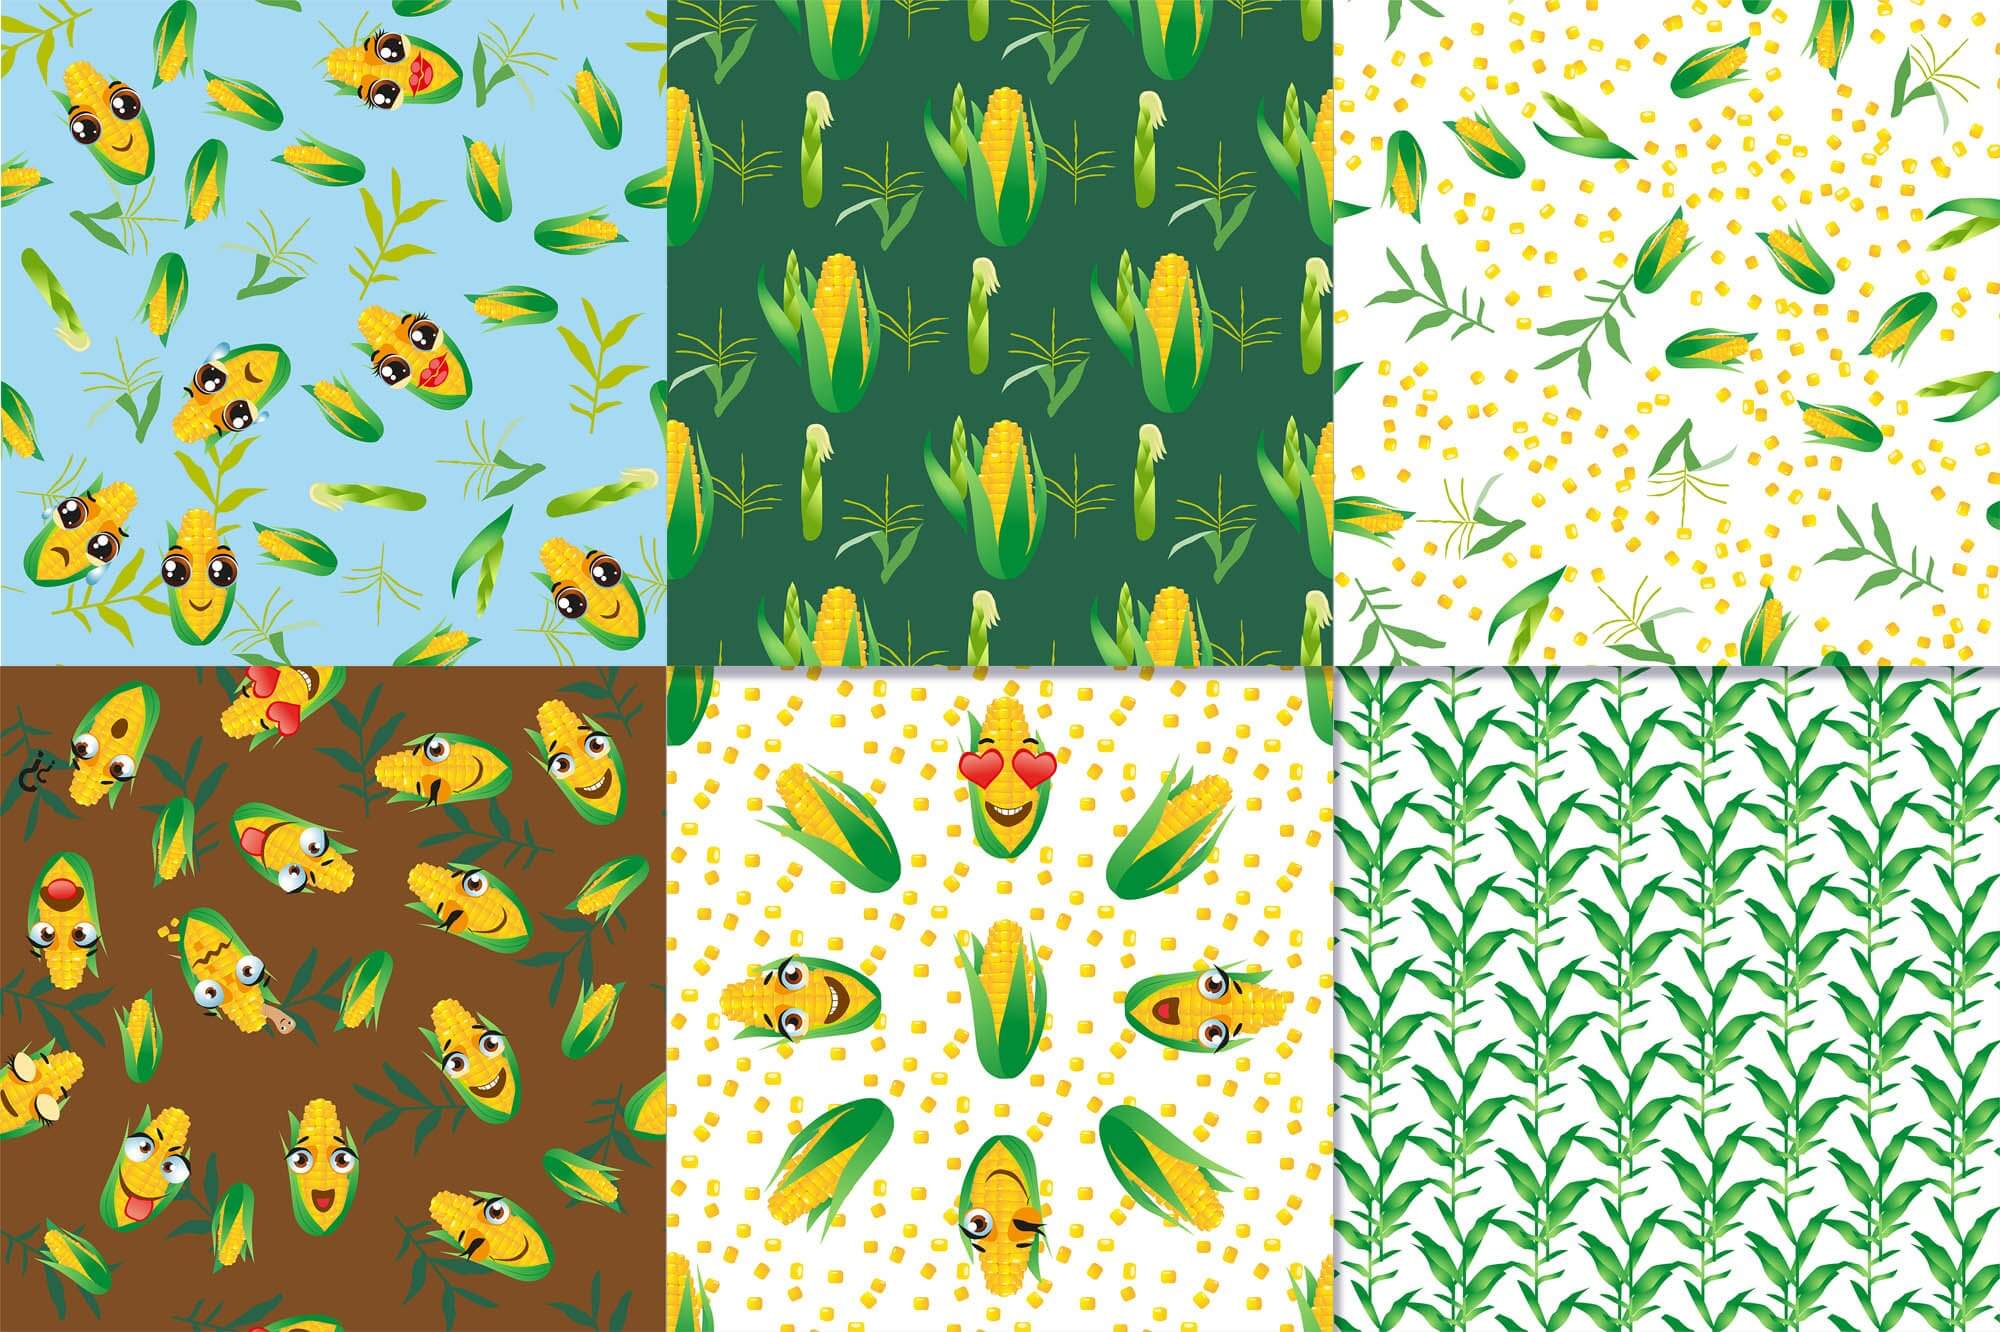 Cartoon corn on white and colored backgrounds.